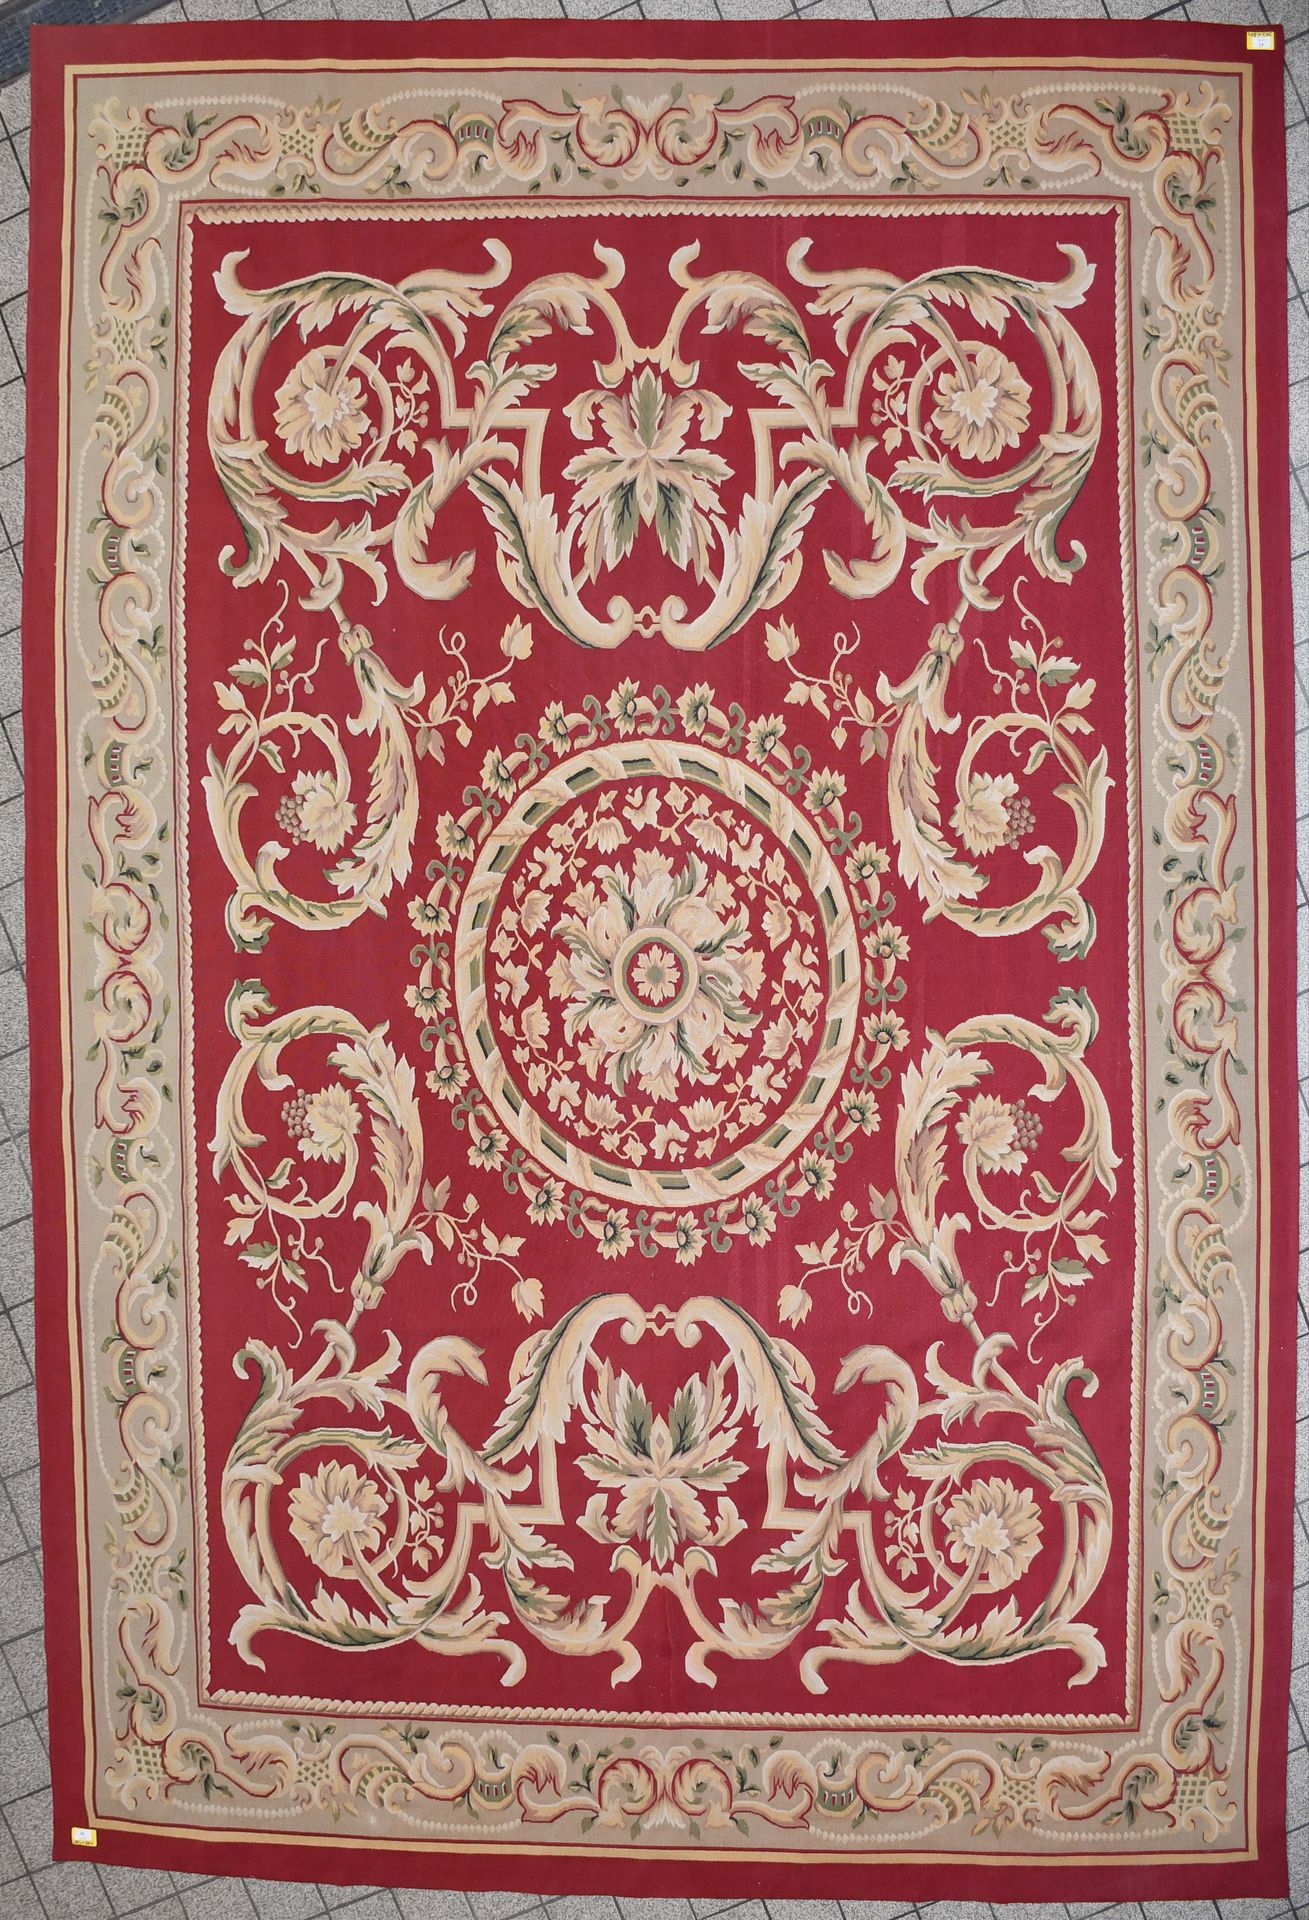 Null Aubusson tapestry with floral decoration - Dimensions : 373 cm x 274 cm